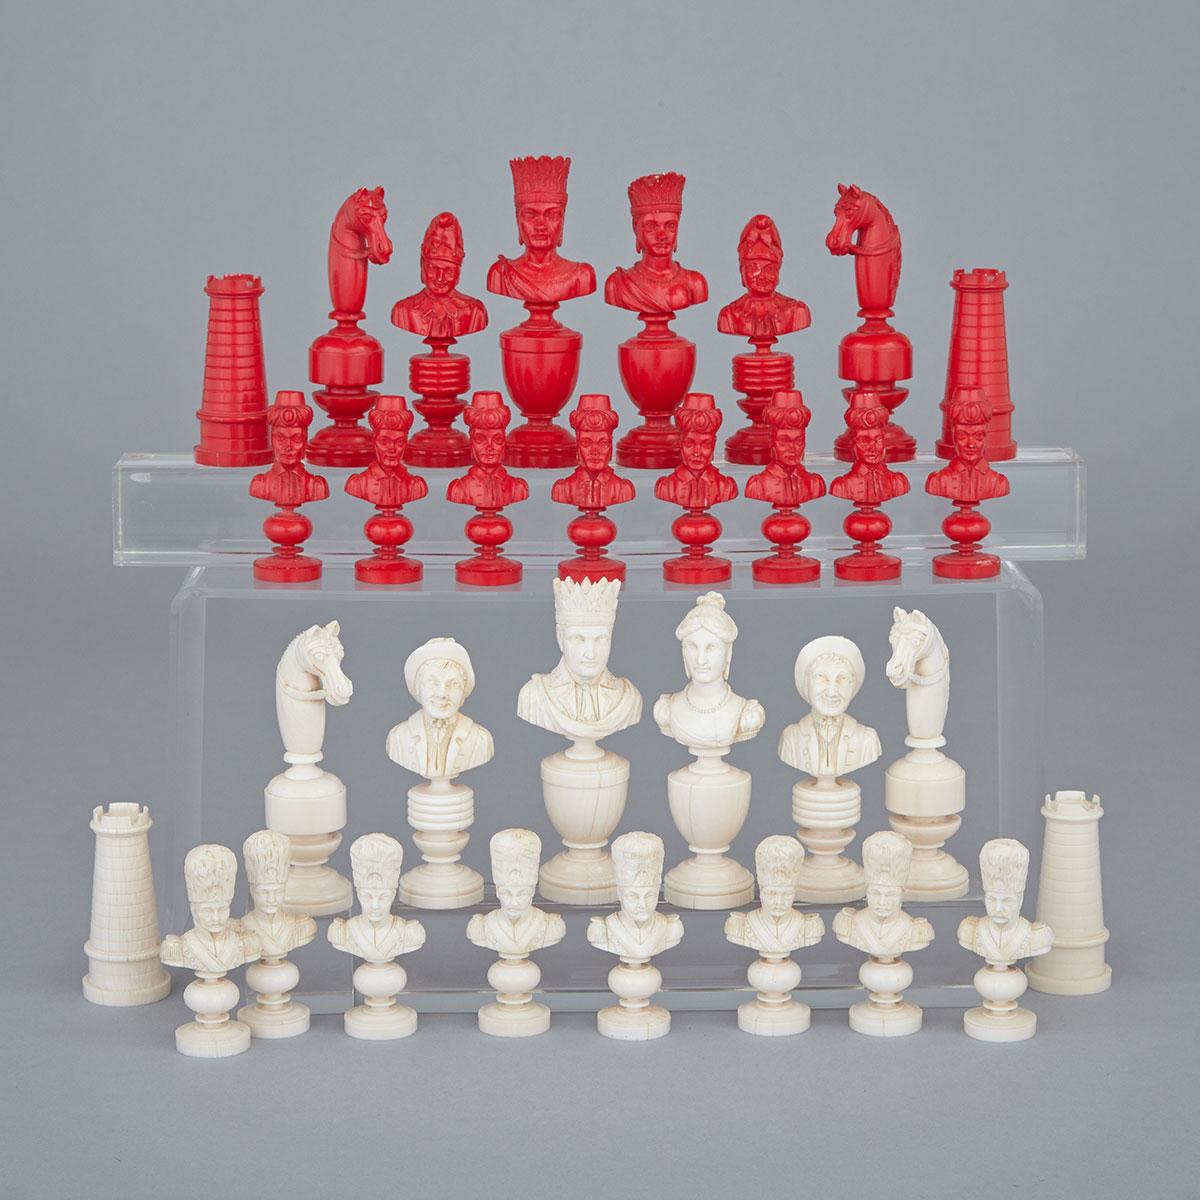 French Turned and Carved Europe vs. Moors Ivory Bust Form Chess Set, 19th century